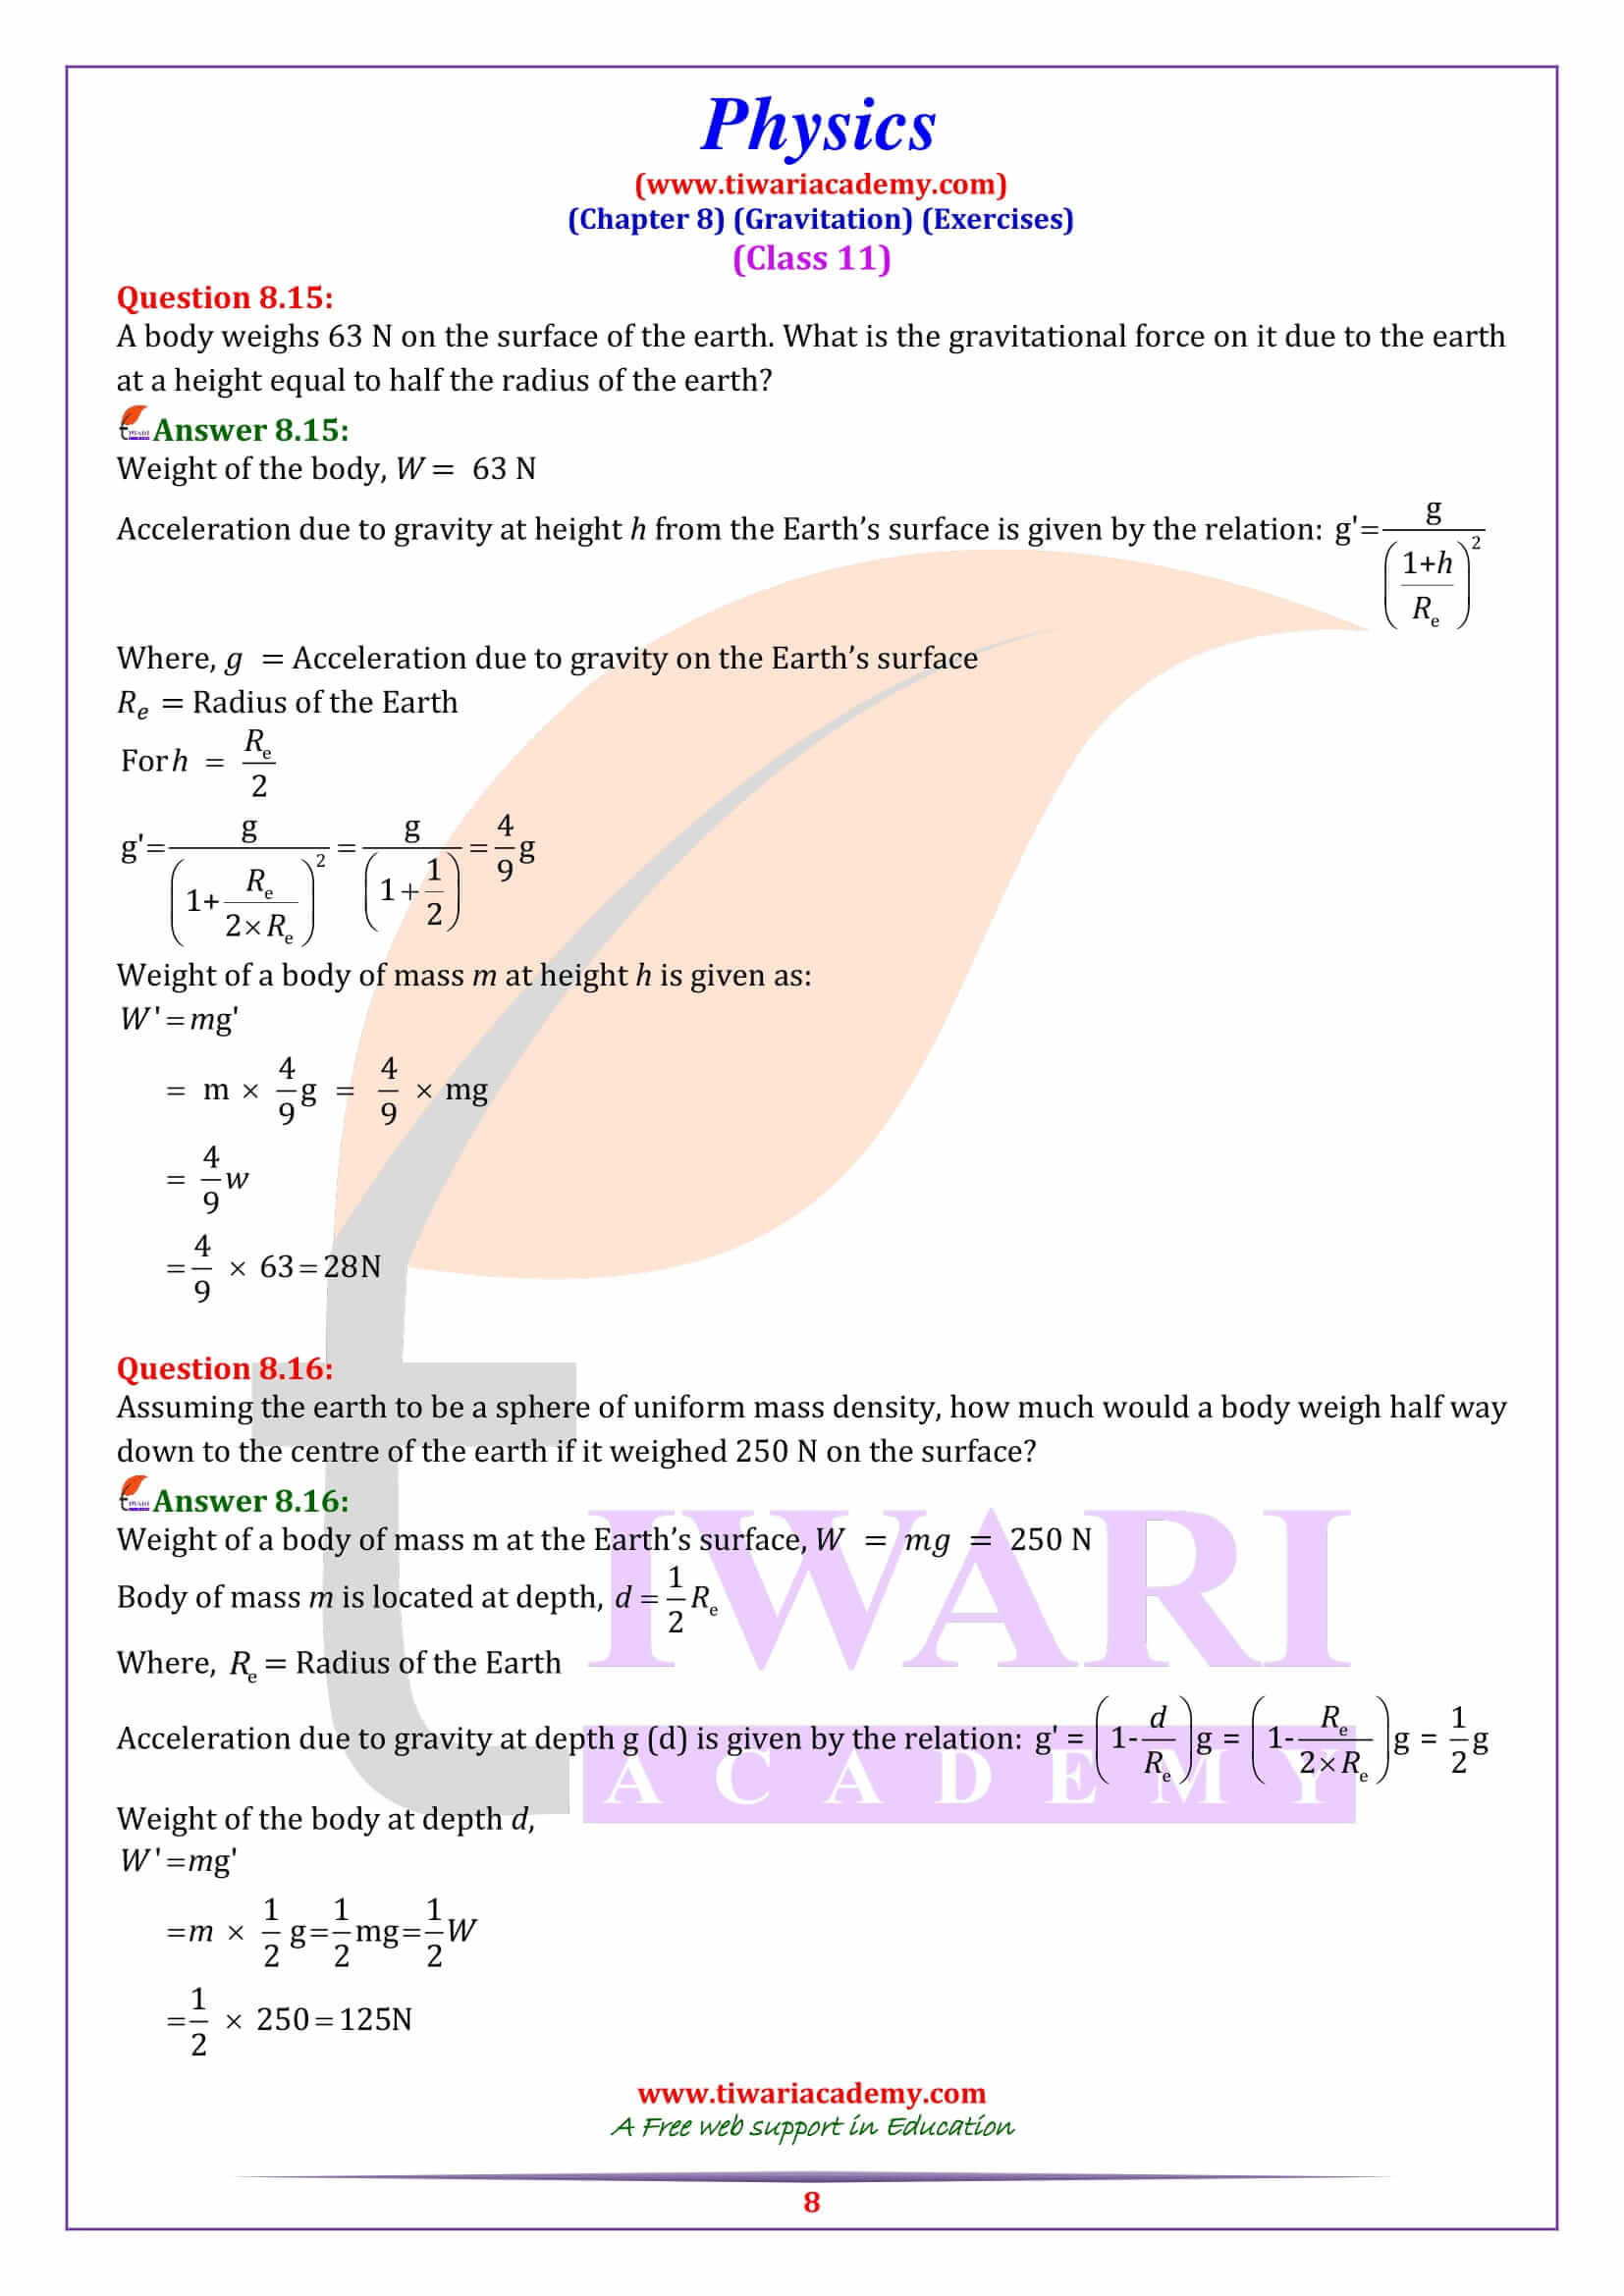 Class 11 Physics Chapter 8 Solutions in English